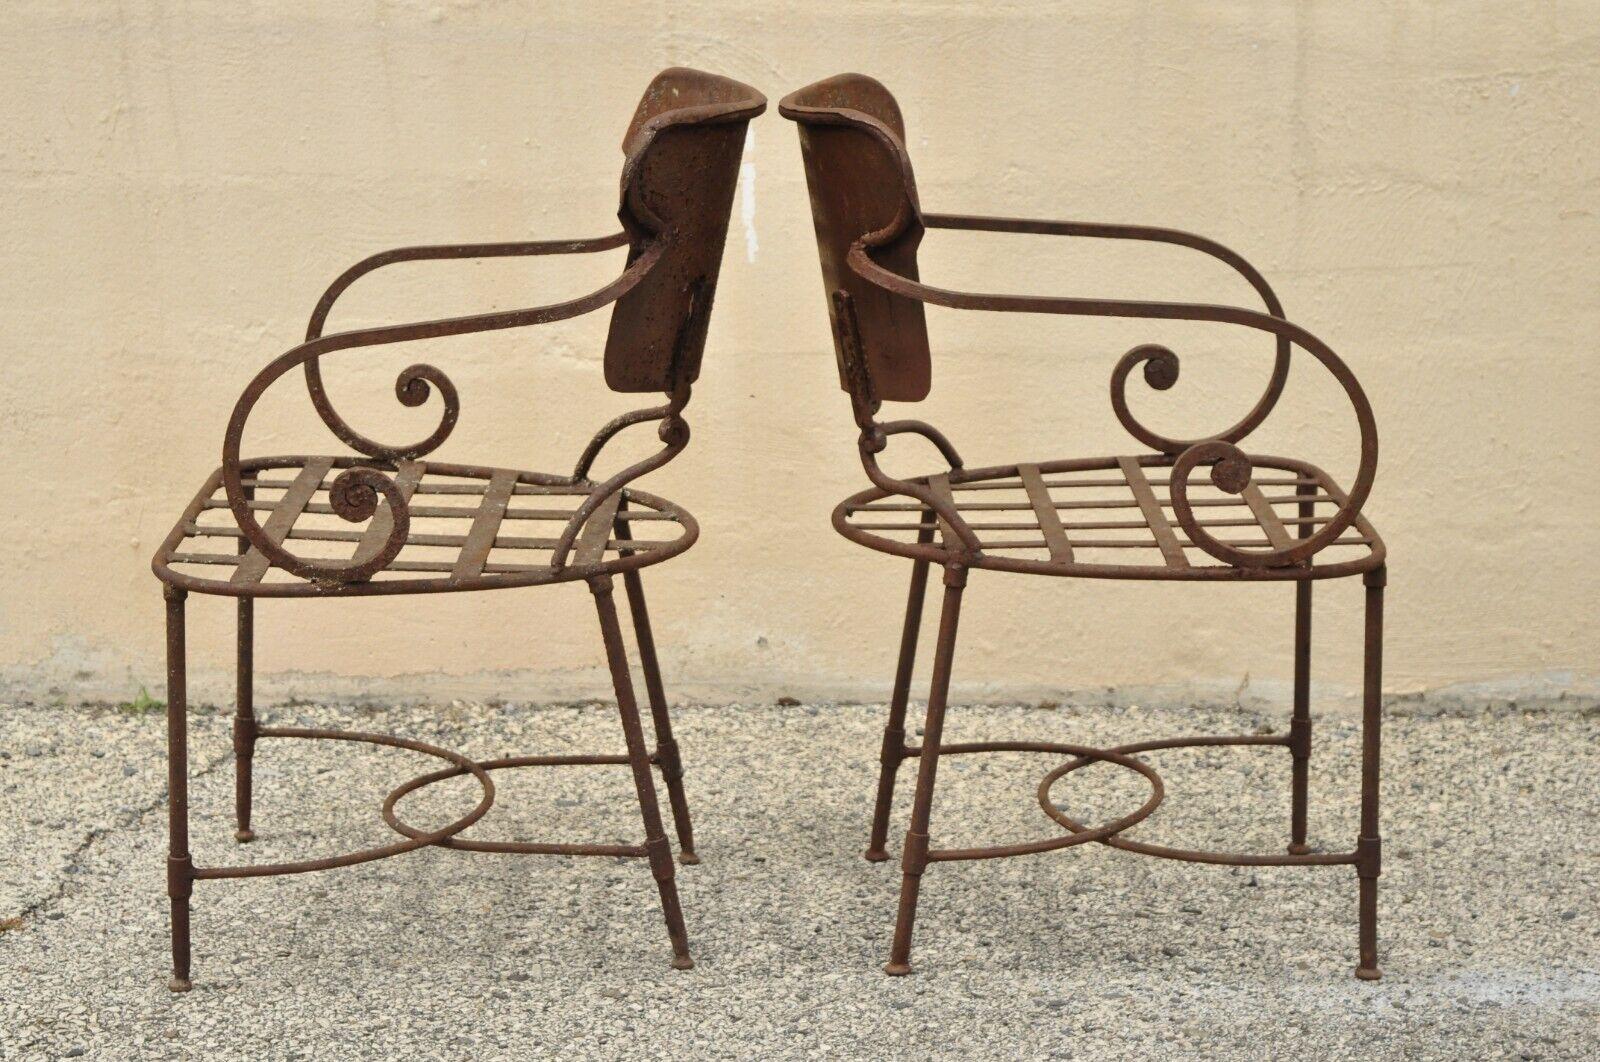 Antique Italian Neoclassical style wrought iron outdoor garden scrolling arm chairs - a pair. Item features heavy wrought iron metal frames, scrolling arms, stretcher base, quality craftsmanship, great style and form. Circa early to Mid 20th